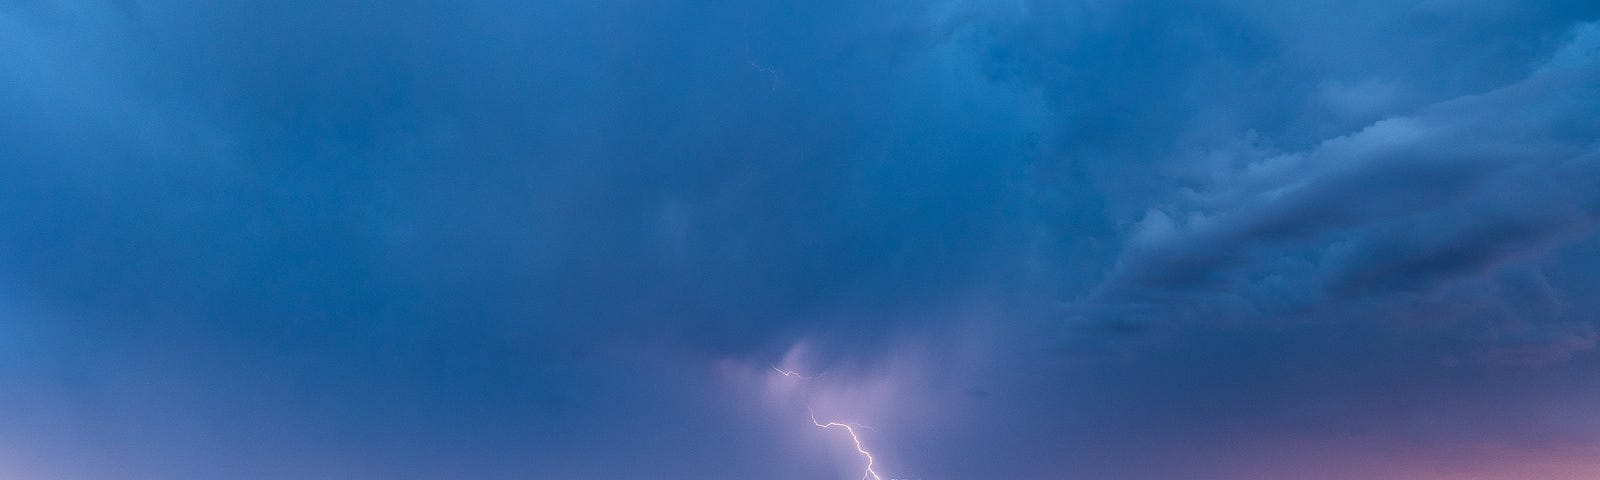 lightning strike and pending rain storm in shades of lavender and blue